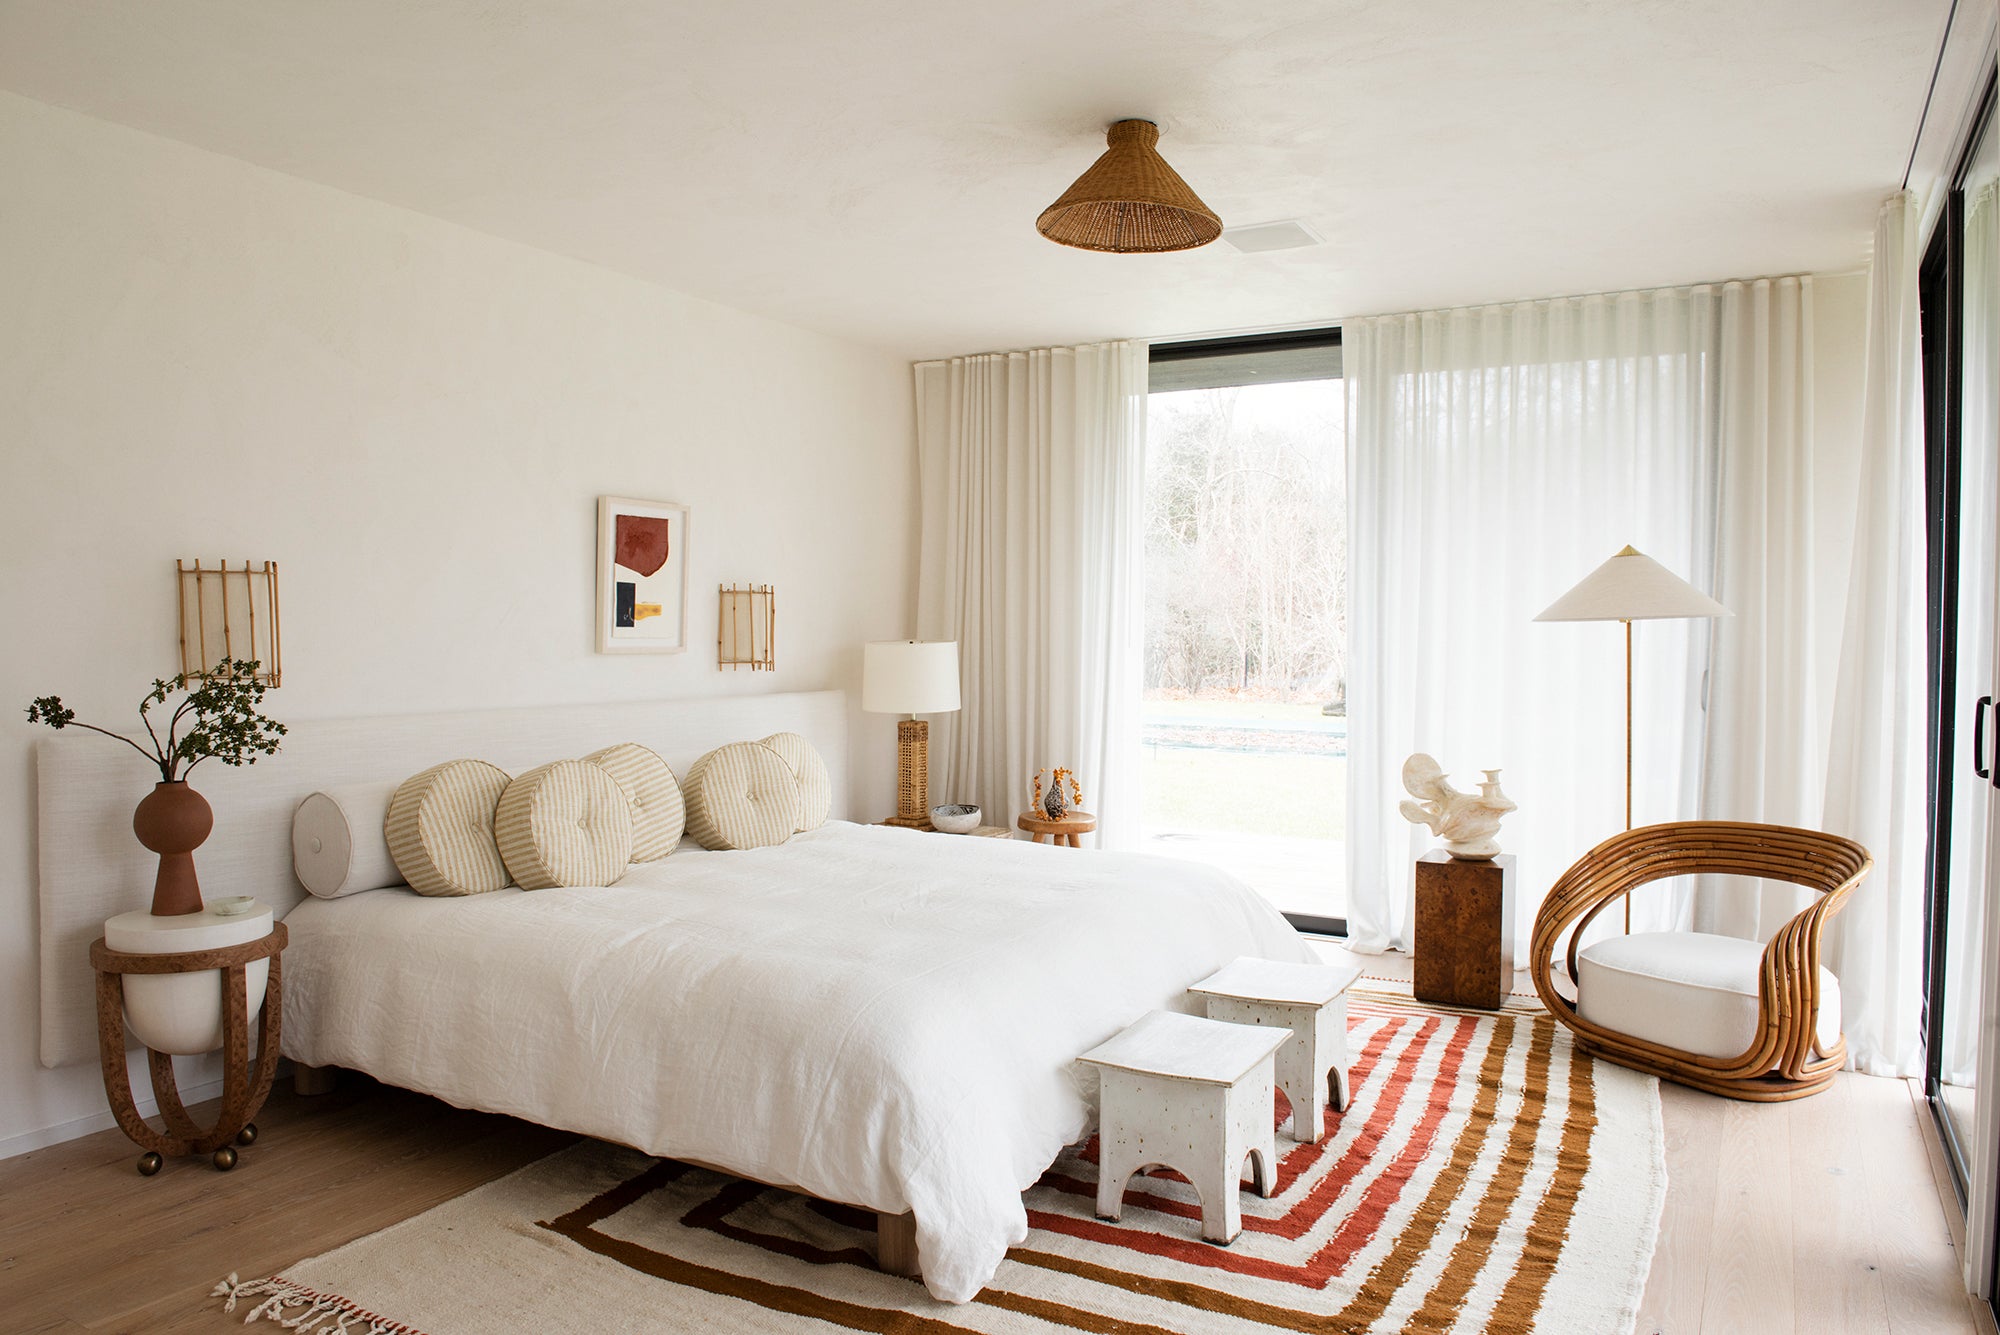 graphic striped bedroom rug and neutral bedding